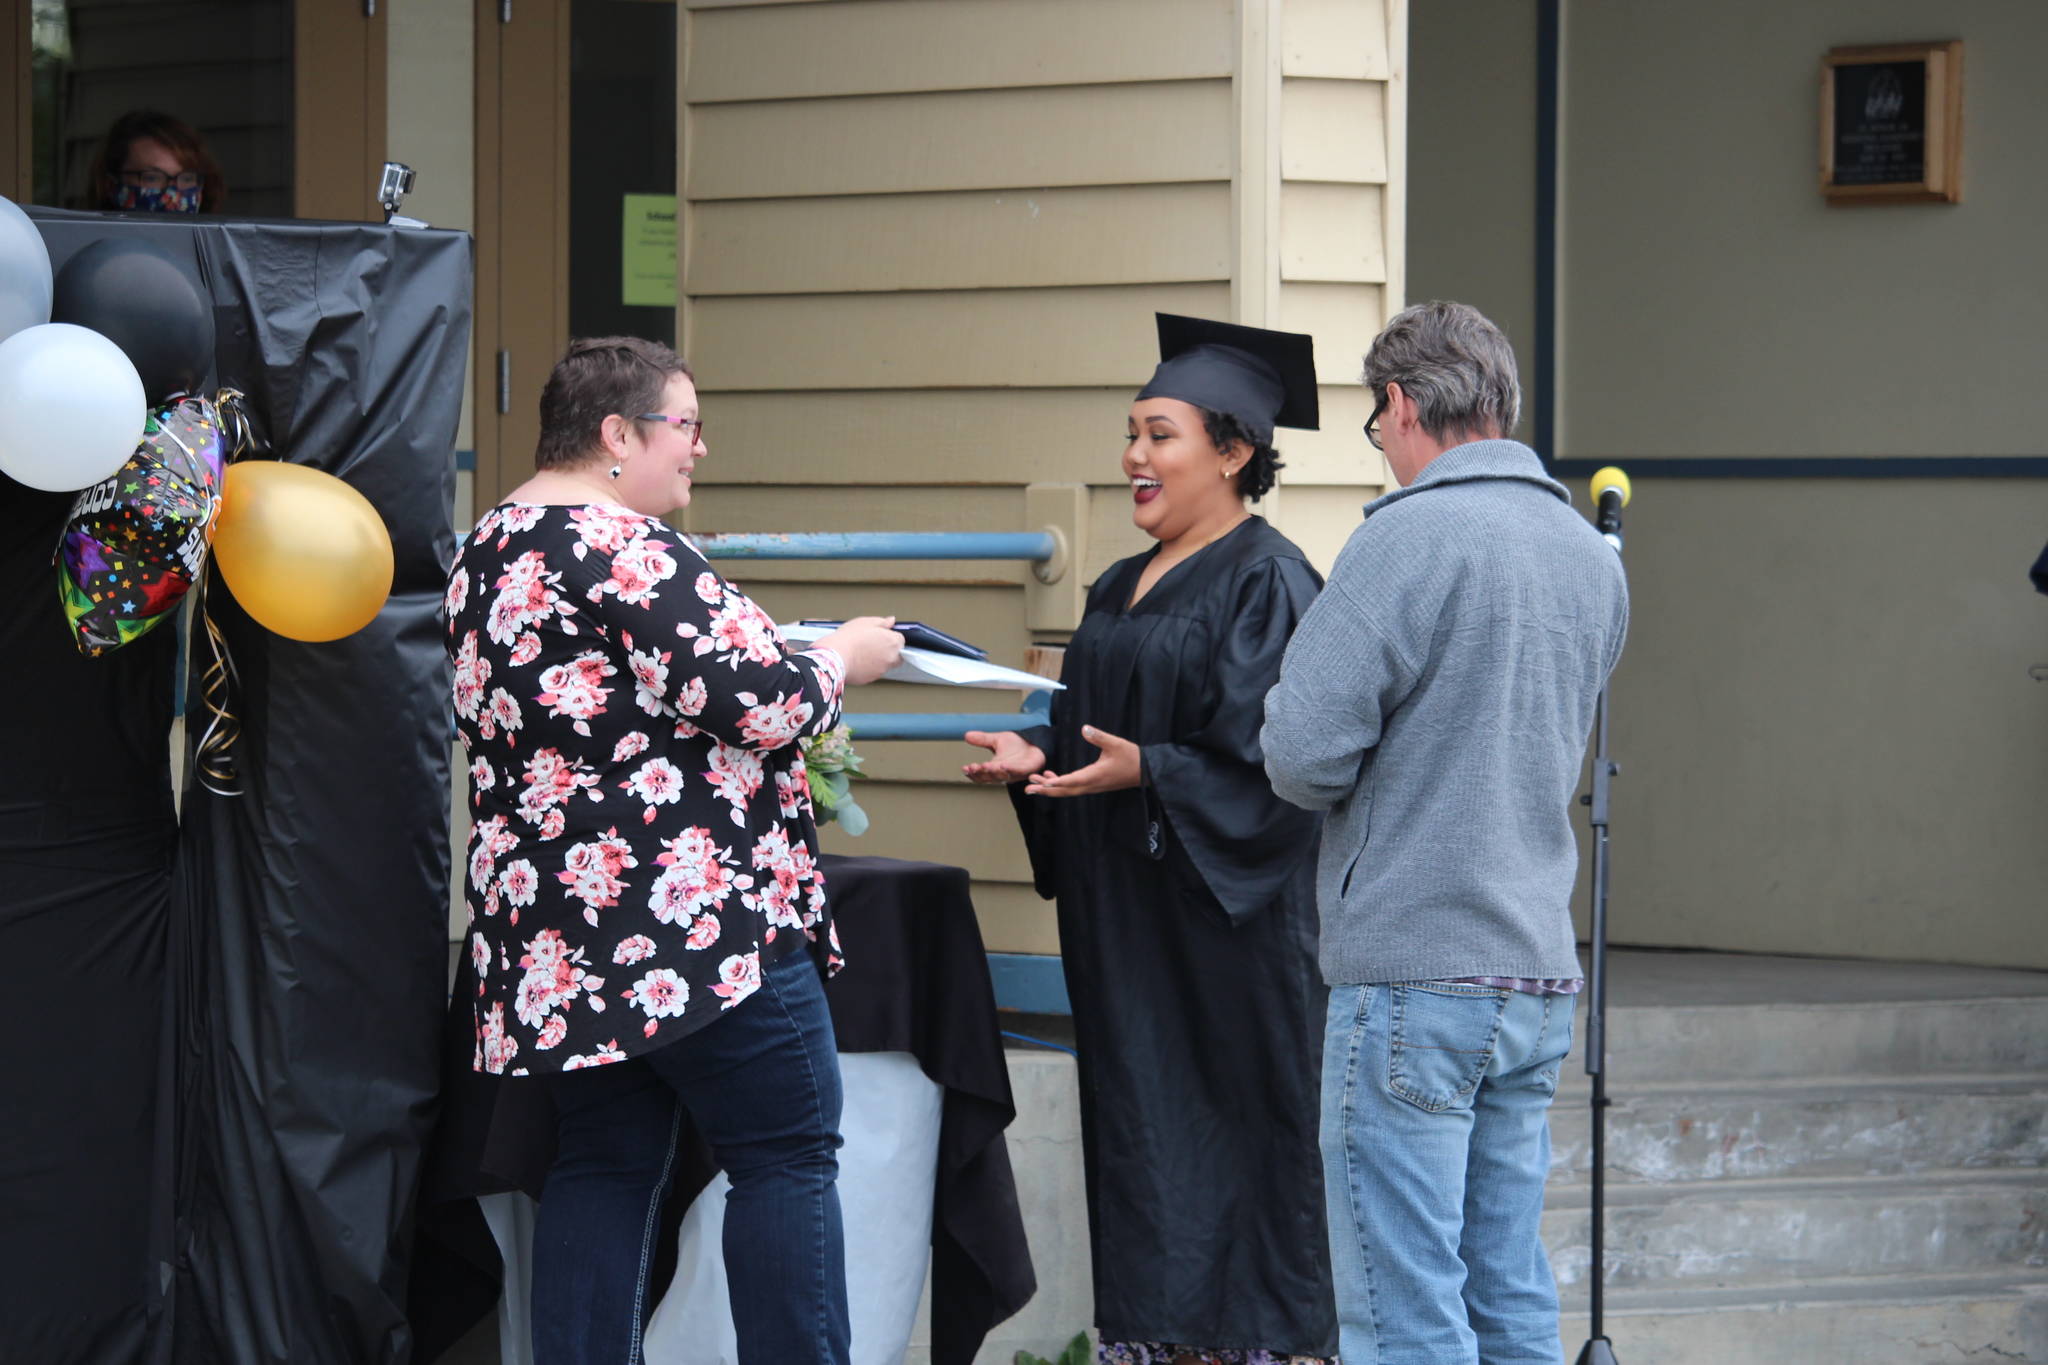 Denali Jackson receives her diploma from her mom, Leah, during the Connections Homeschool Class of 2020 graduation at Soldotna Elementary School in Soldotna, Alaska on May 21, 2020. (Photo by Brian Mazurek/Peninsula Clarion)